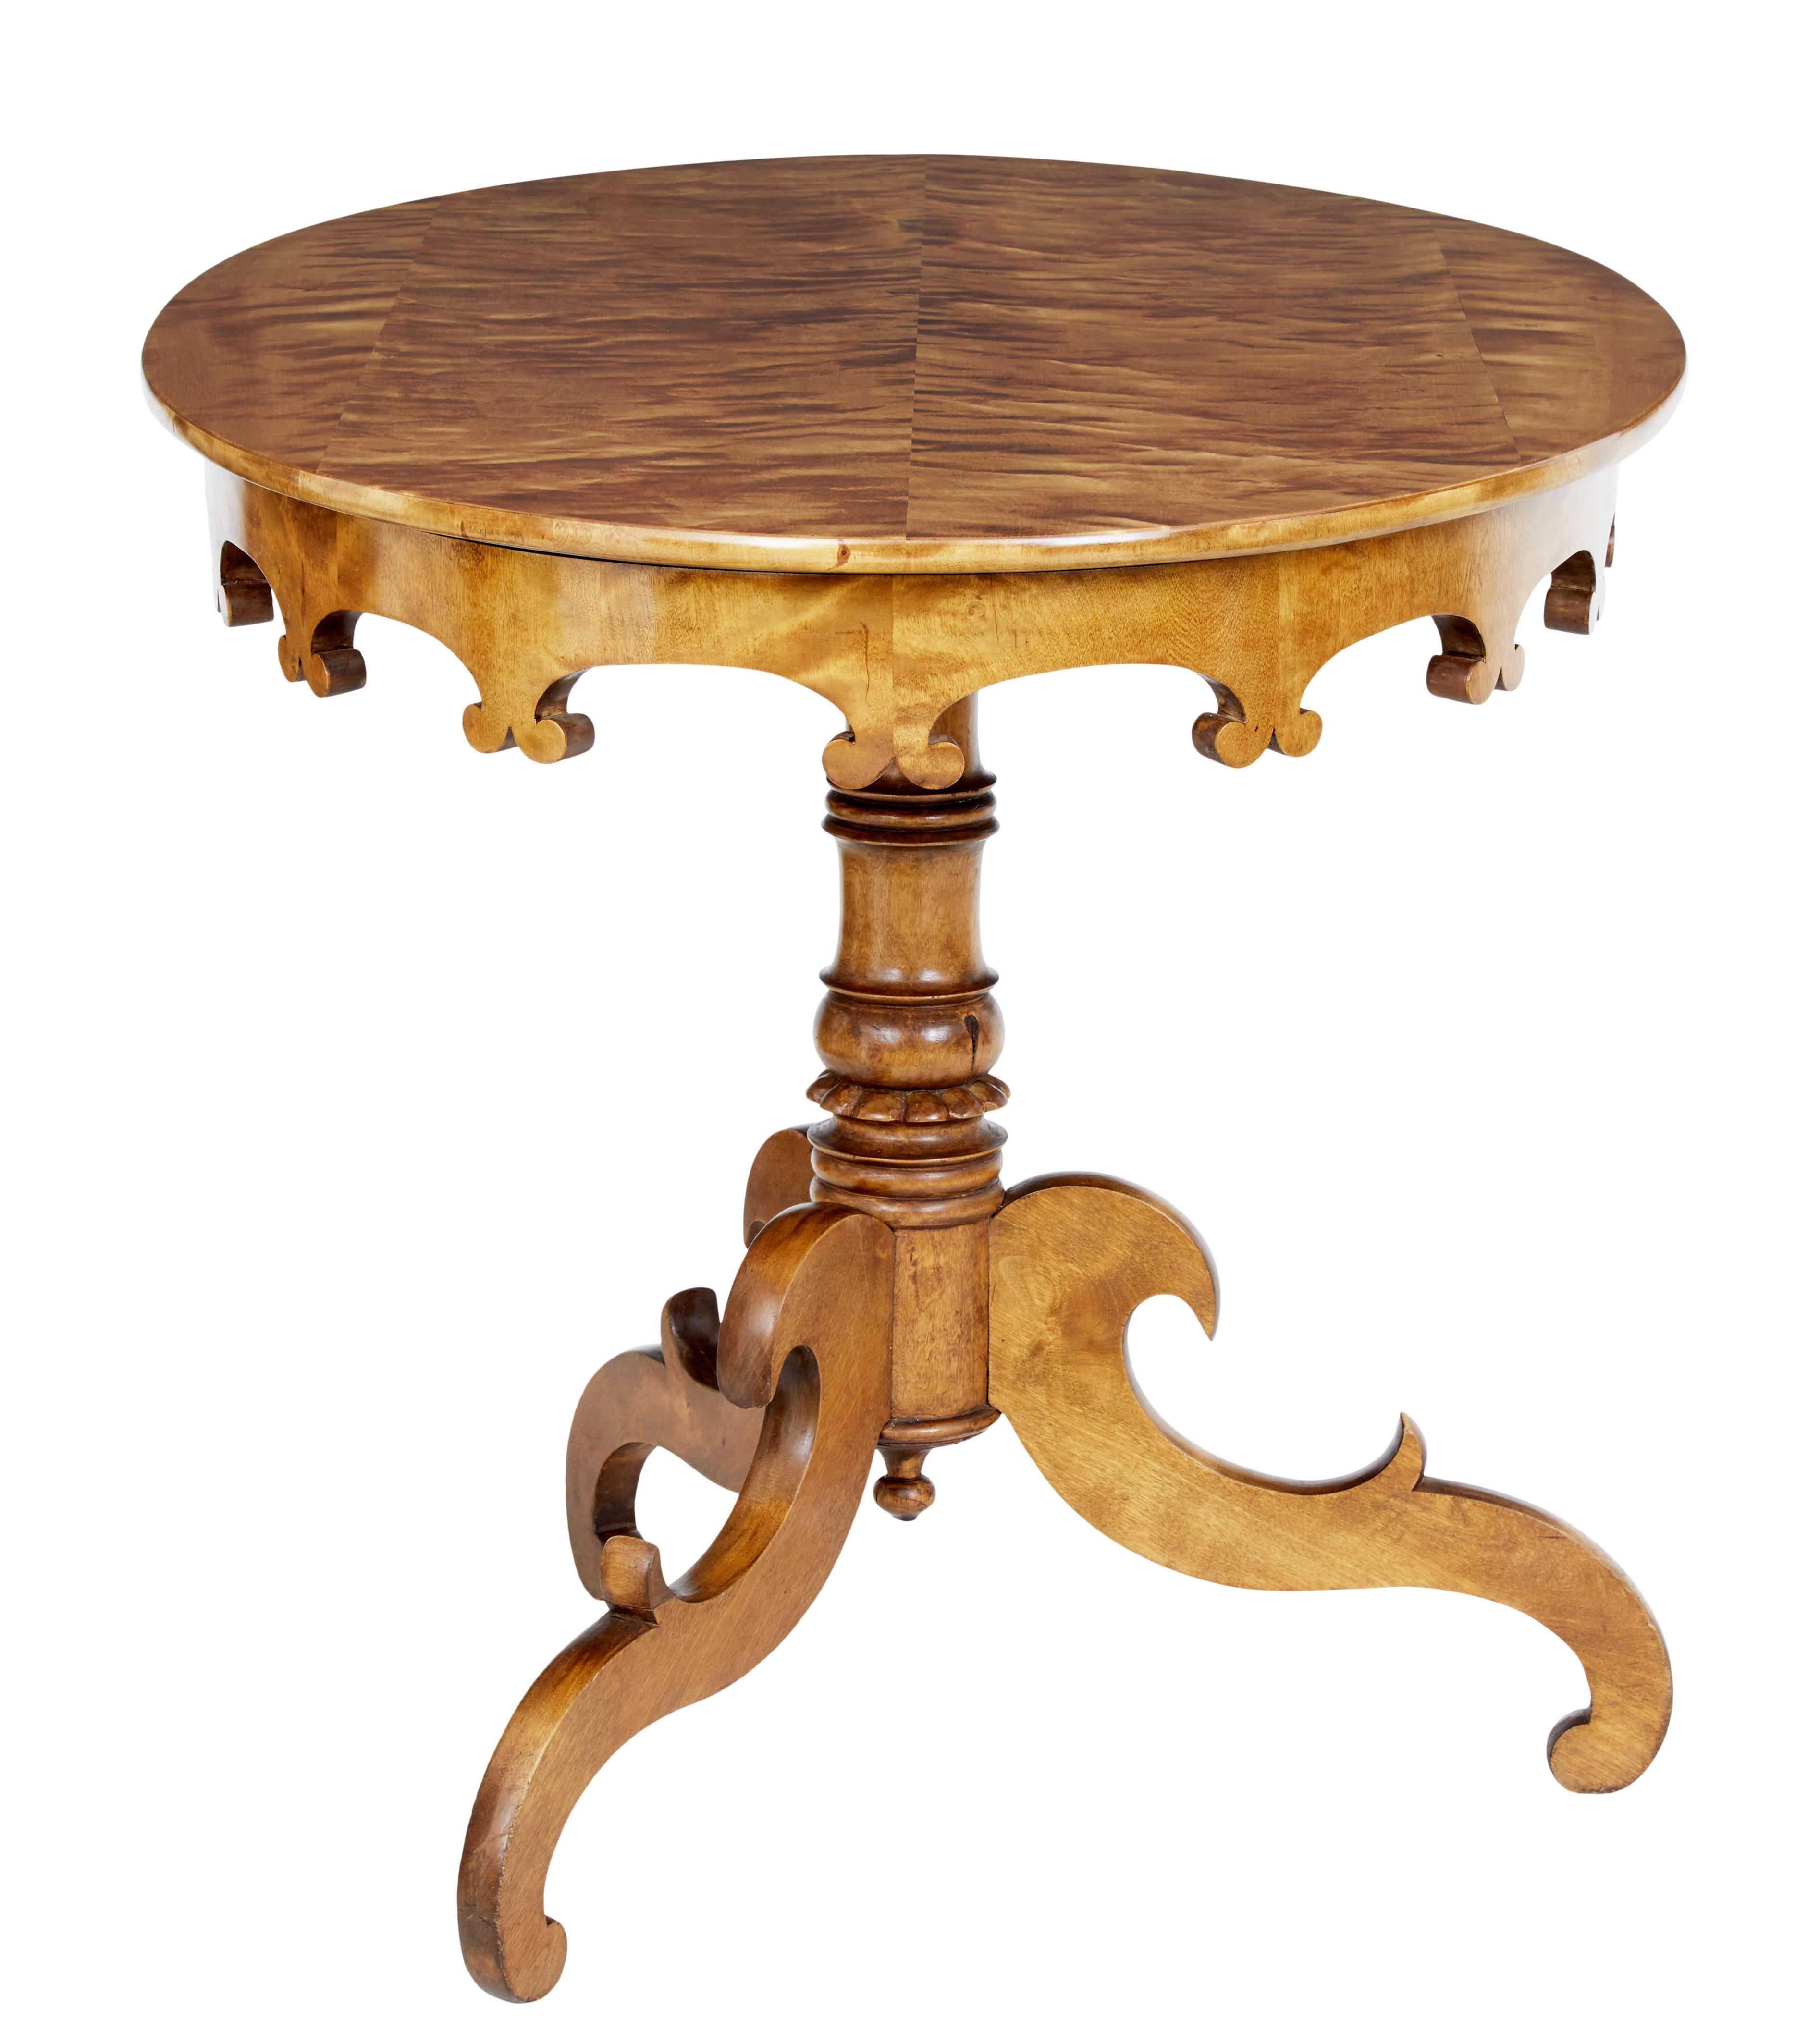 Swedish 19th century burr birch oval occasional table circa 1890.

Good quality birch oval table with striking veneered top. Oval shape lends it to be able to be used as a lamp/side or center table.

Shaped decorative frieze. Standing on a